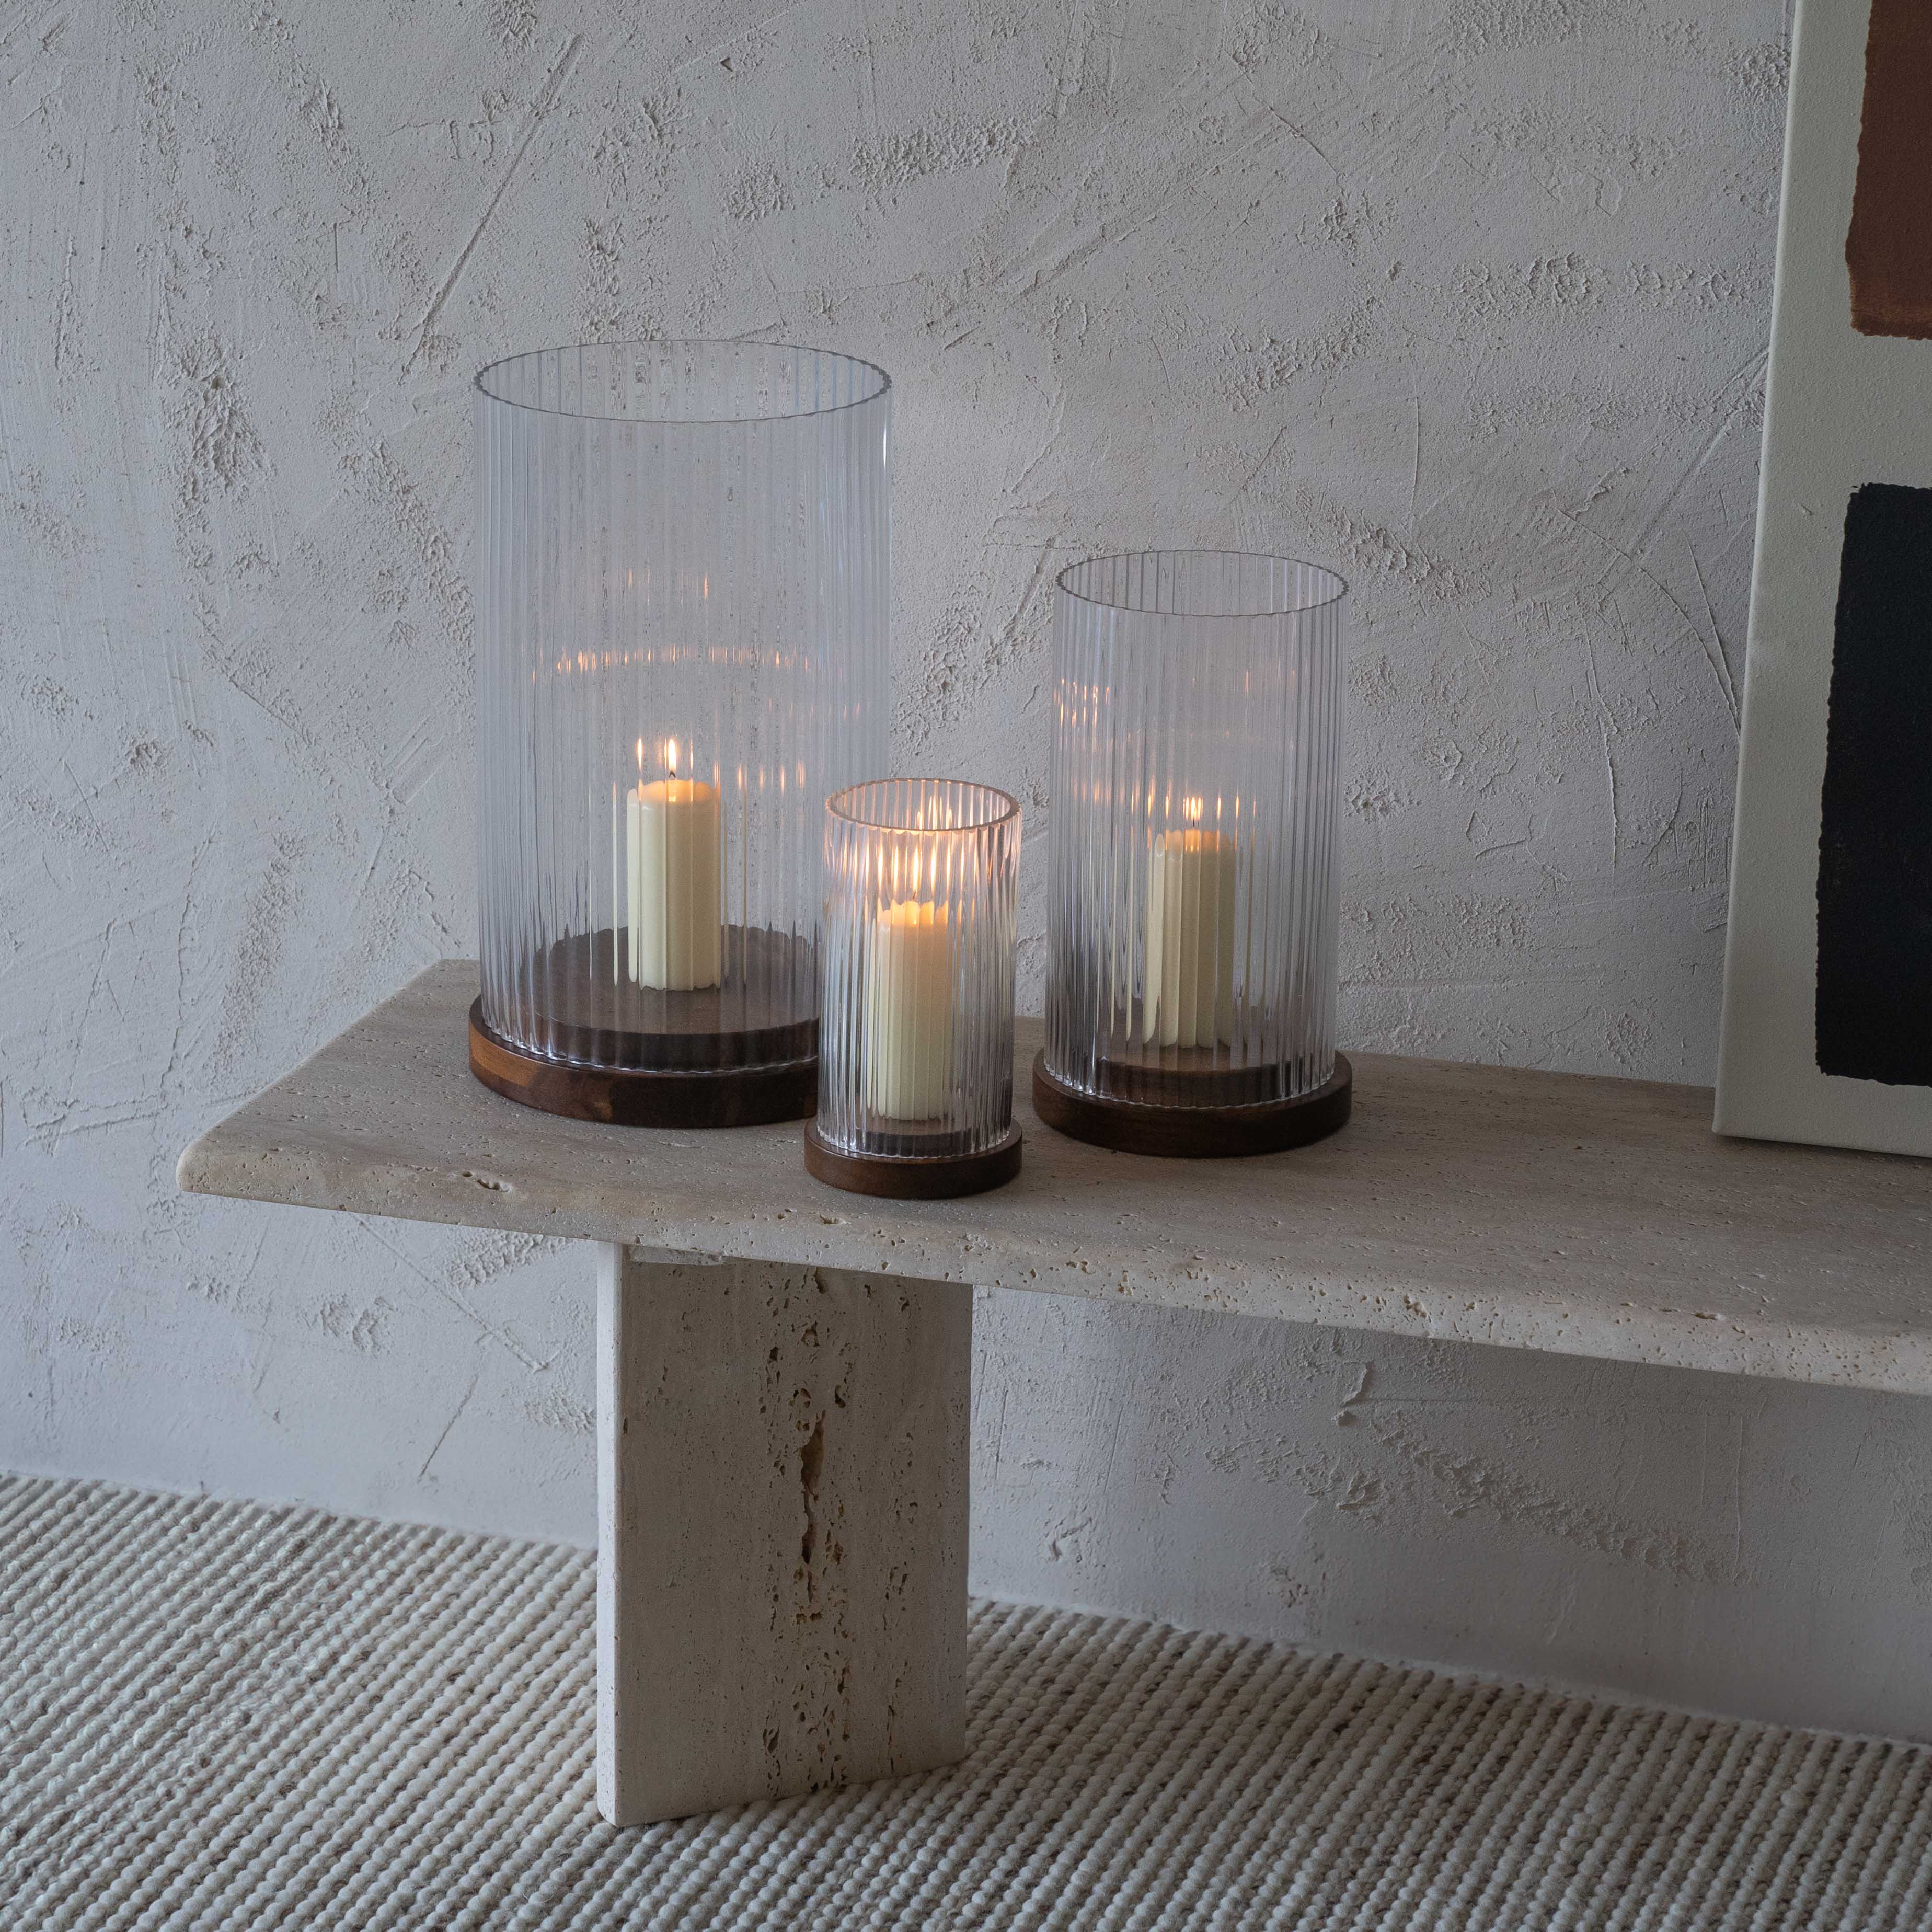 Lola Wood & Glass Candle Holder - Candle Holder - WS Living - UAE Wood and steel Furnitures in Dubai